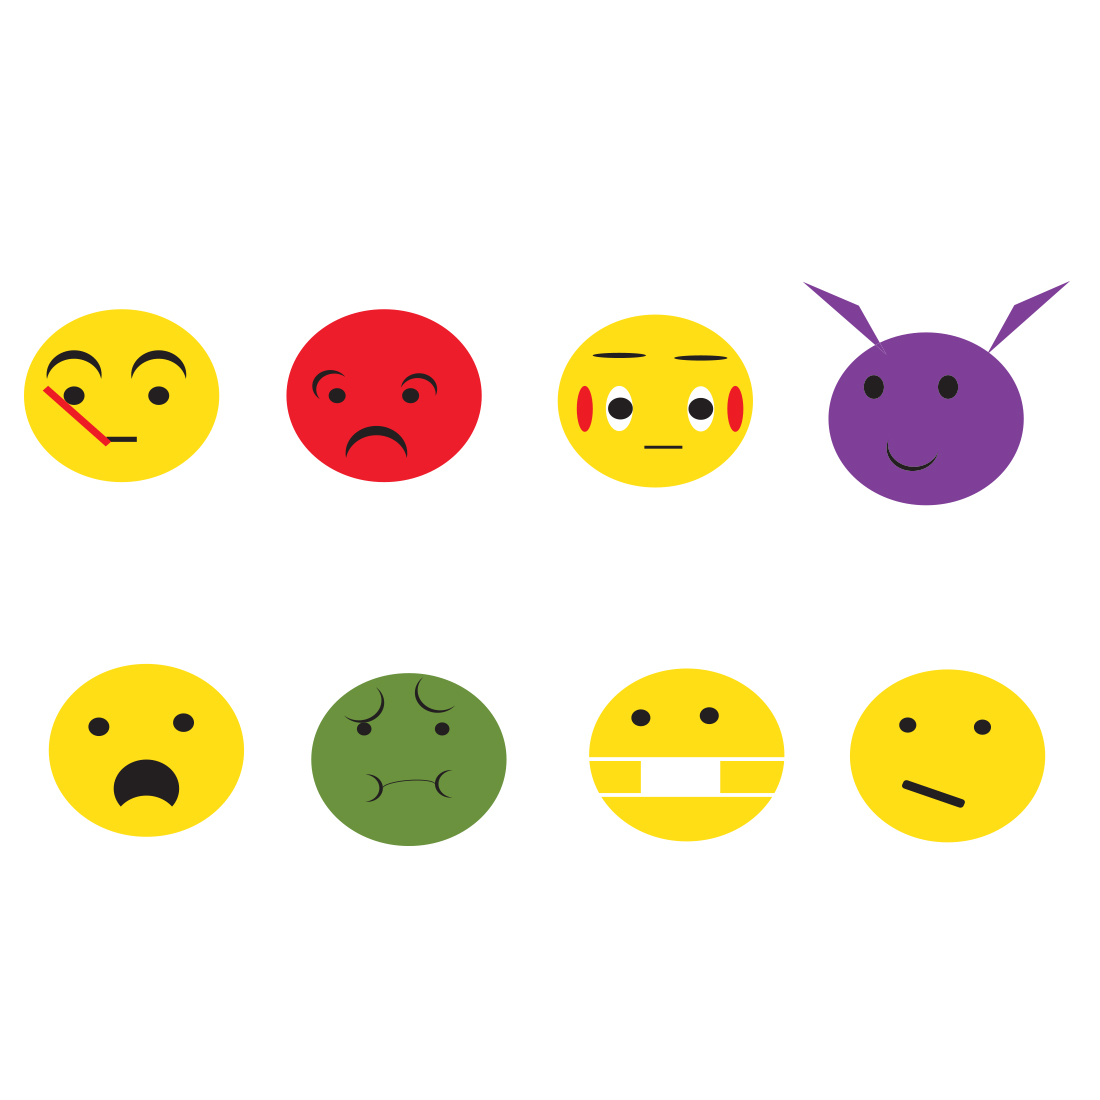 Group of different colored smiley faces.